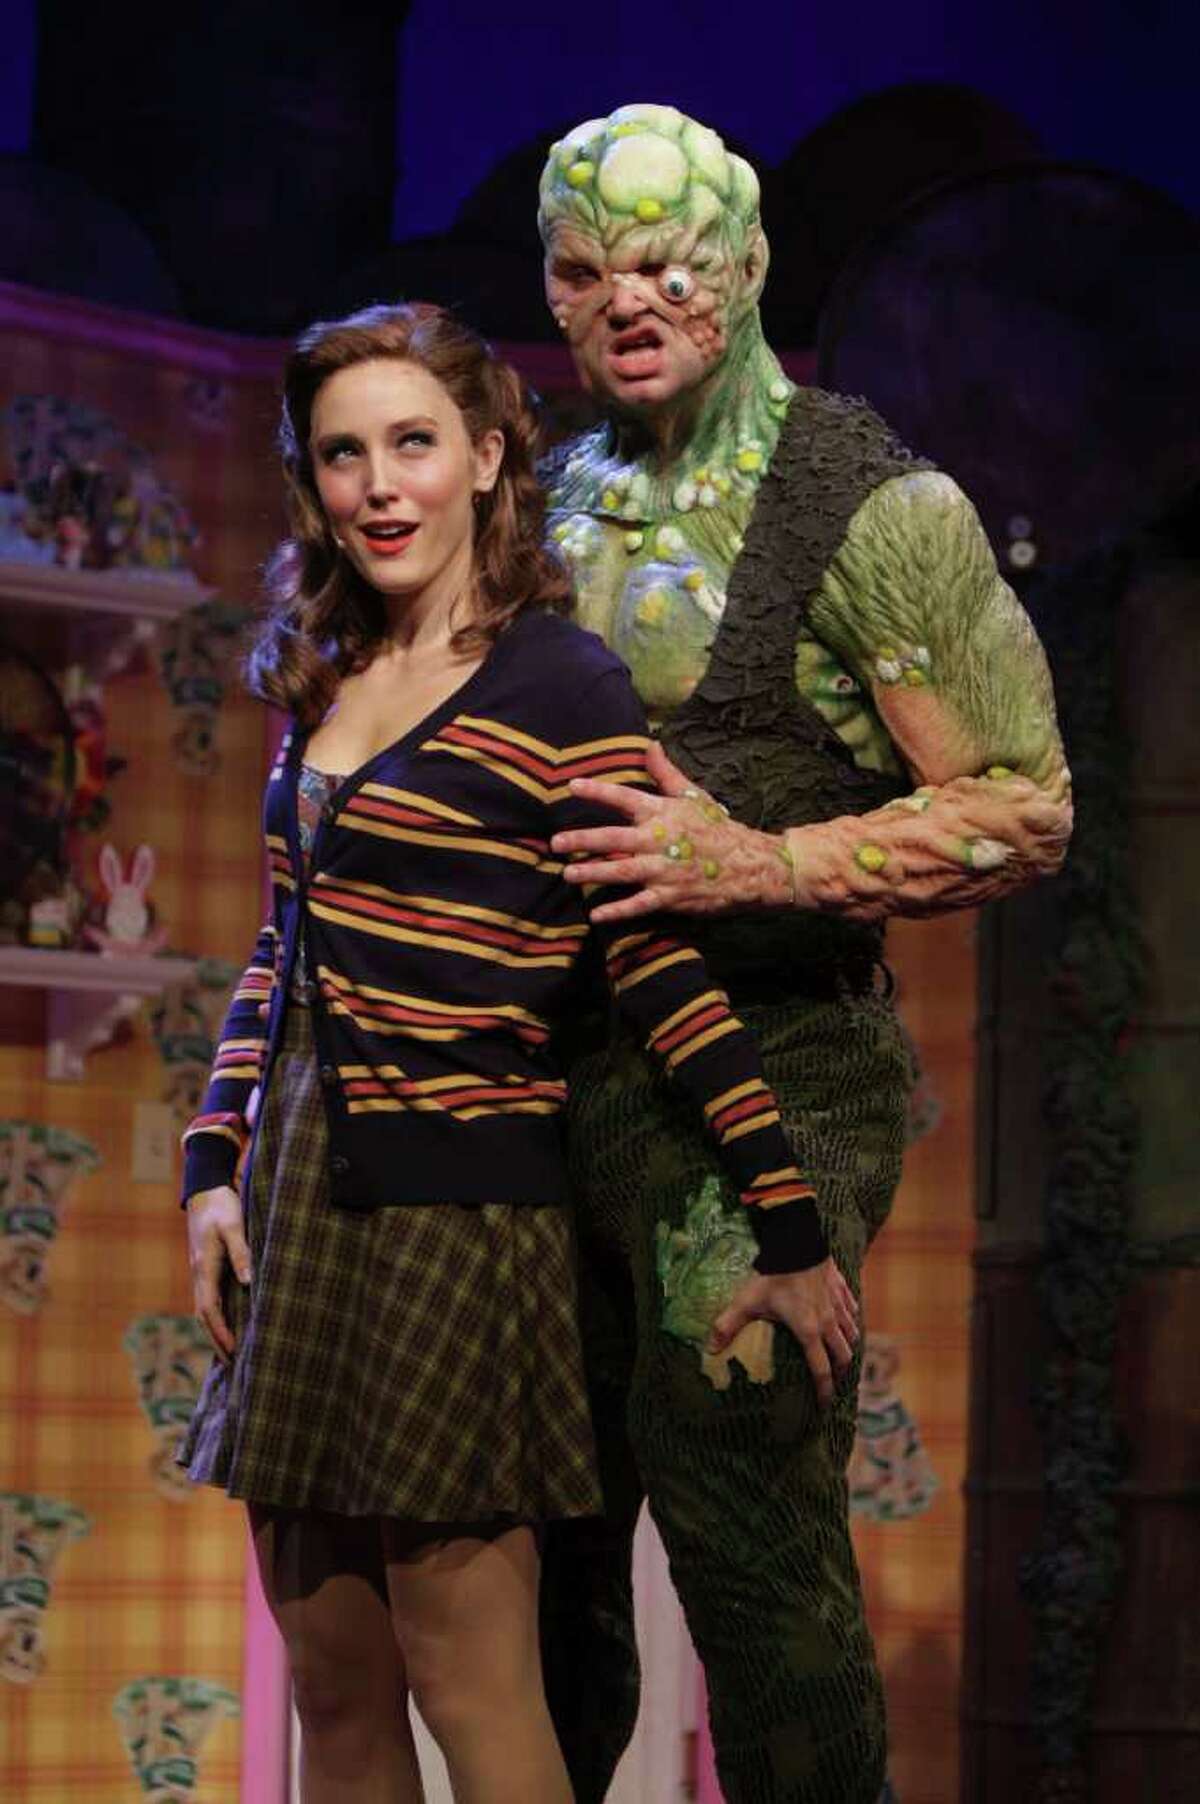 The Toxic Avenger, Constantine Maroulis, right, and his love interest Sarah the blind librarian, Mara Davi, during a dress rehearsal of the Toxic Avenger Tuesday, Jan. 10, 2012, in Houston. The Toxic Avenger will start January 13 and run until February 12. ( Nick de la Torre / Chronicle )